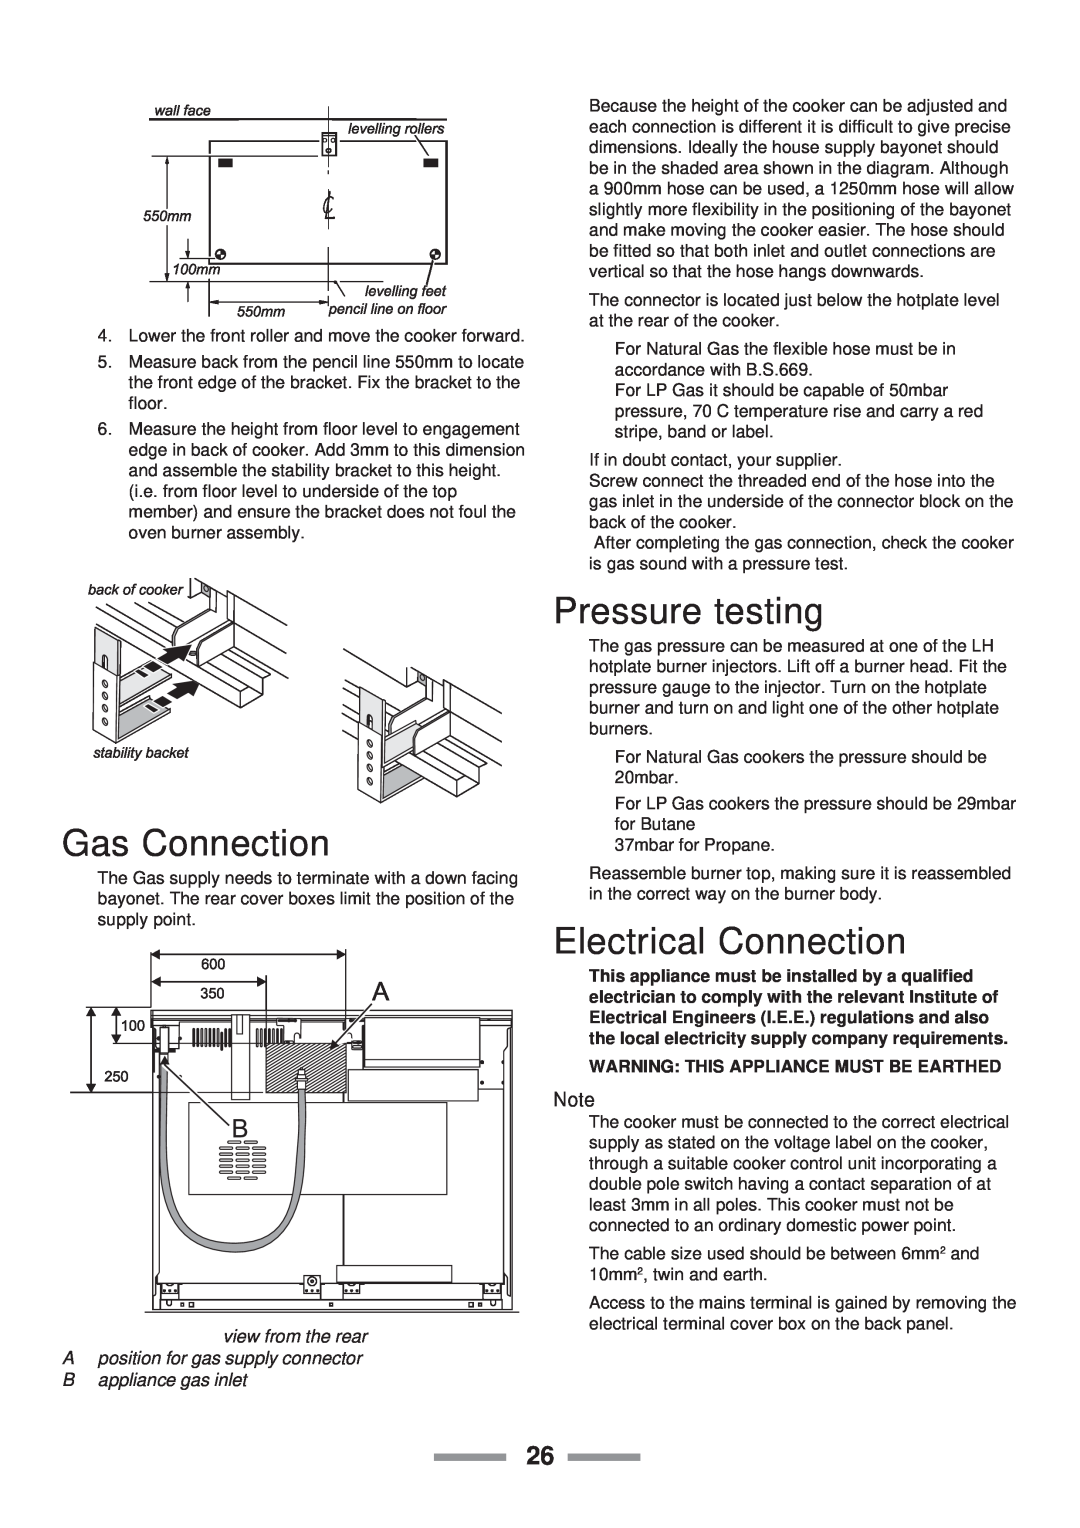 Rangemaster 110 Gas Connection, Pressure testing, Electrical Connection, Warning This Appliance Must Be Earthed 